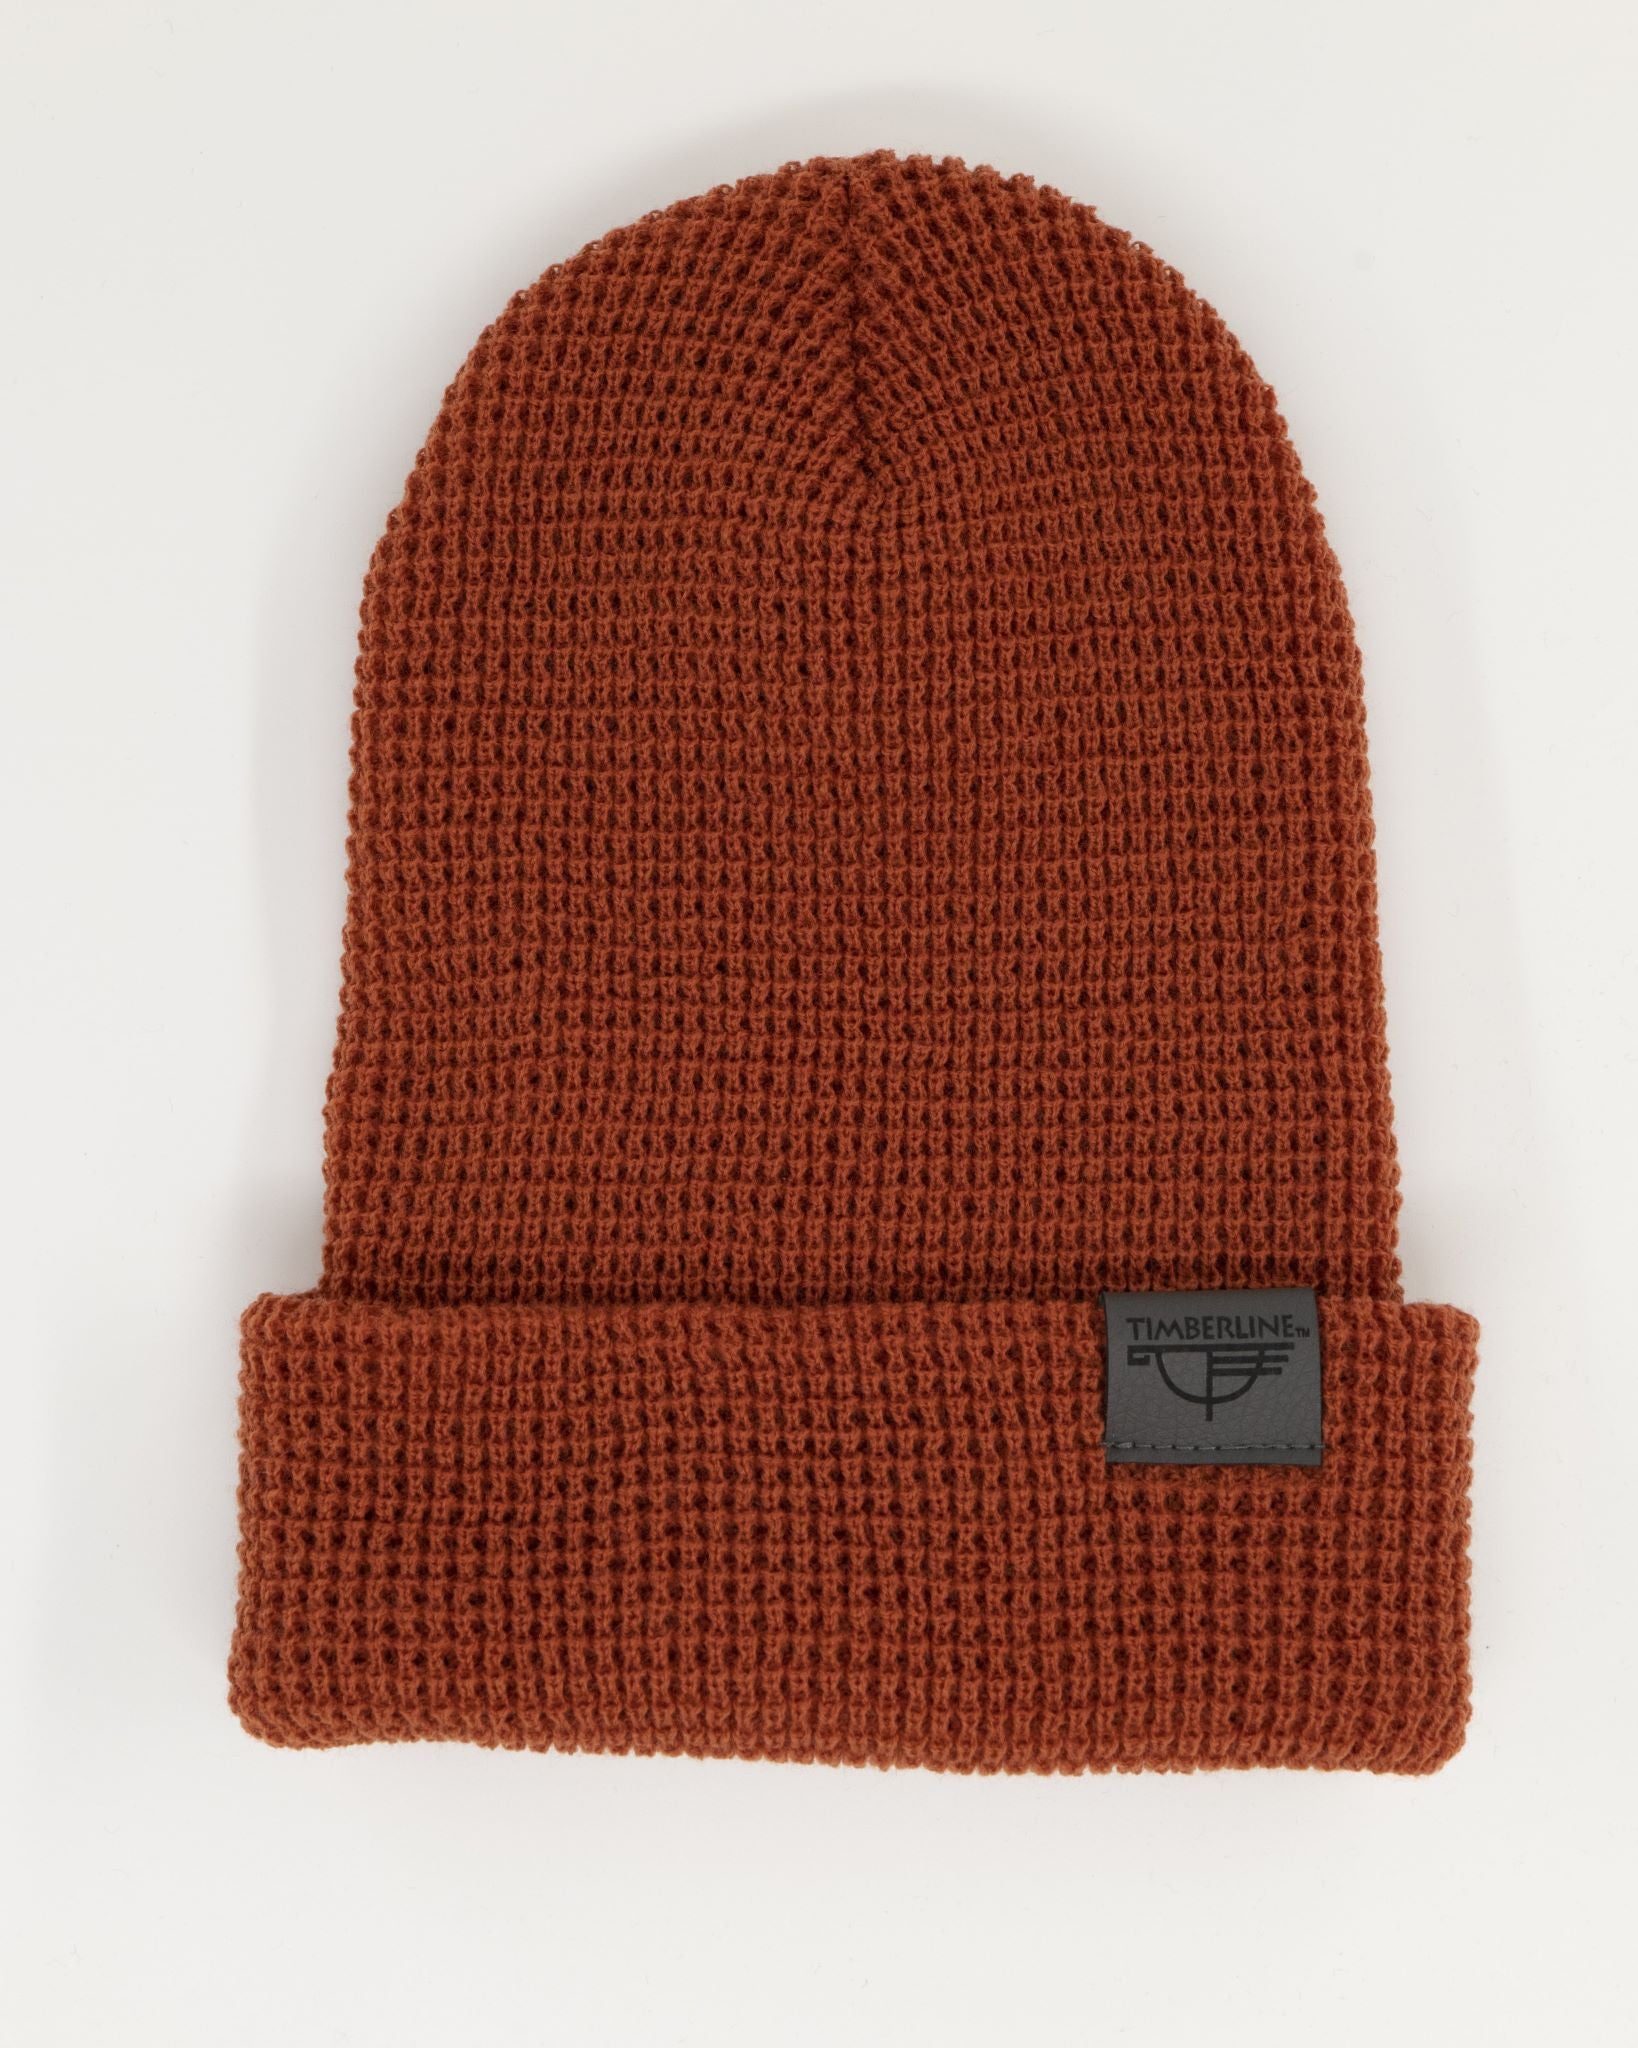 Beanie - Timberline Waffle Knit - Available in Charcoal, Birch, and Rust